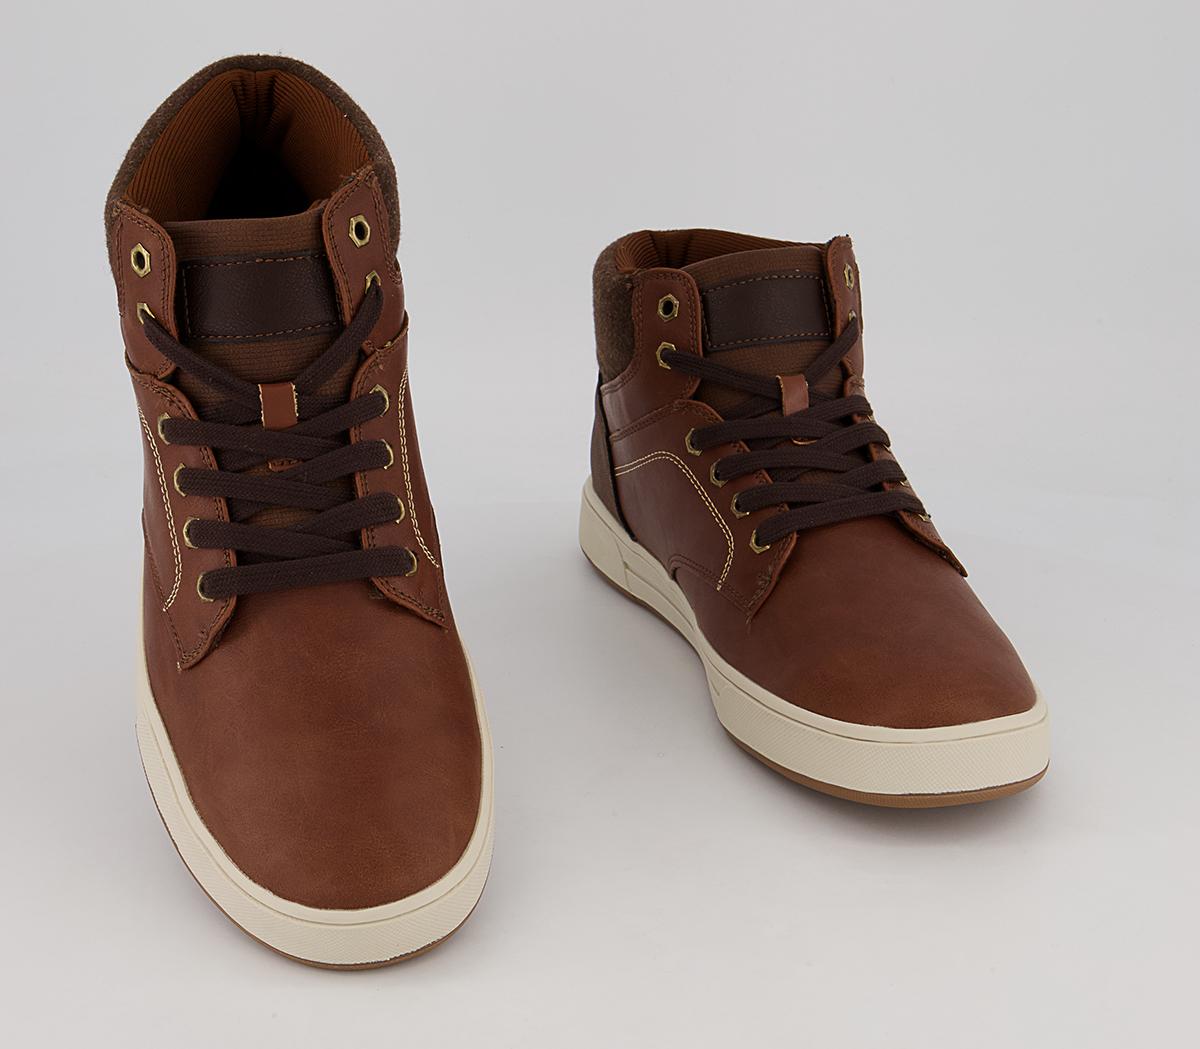 OFFICE Croydon Smart Casual Mid Top Sneakers Tan - Men's Casual Shoes